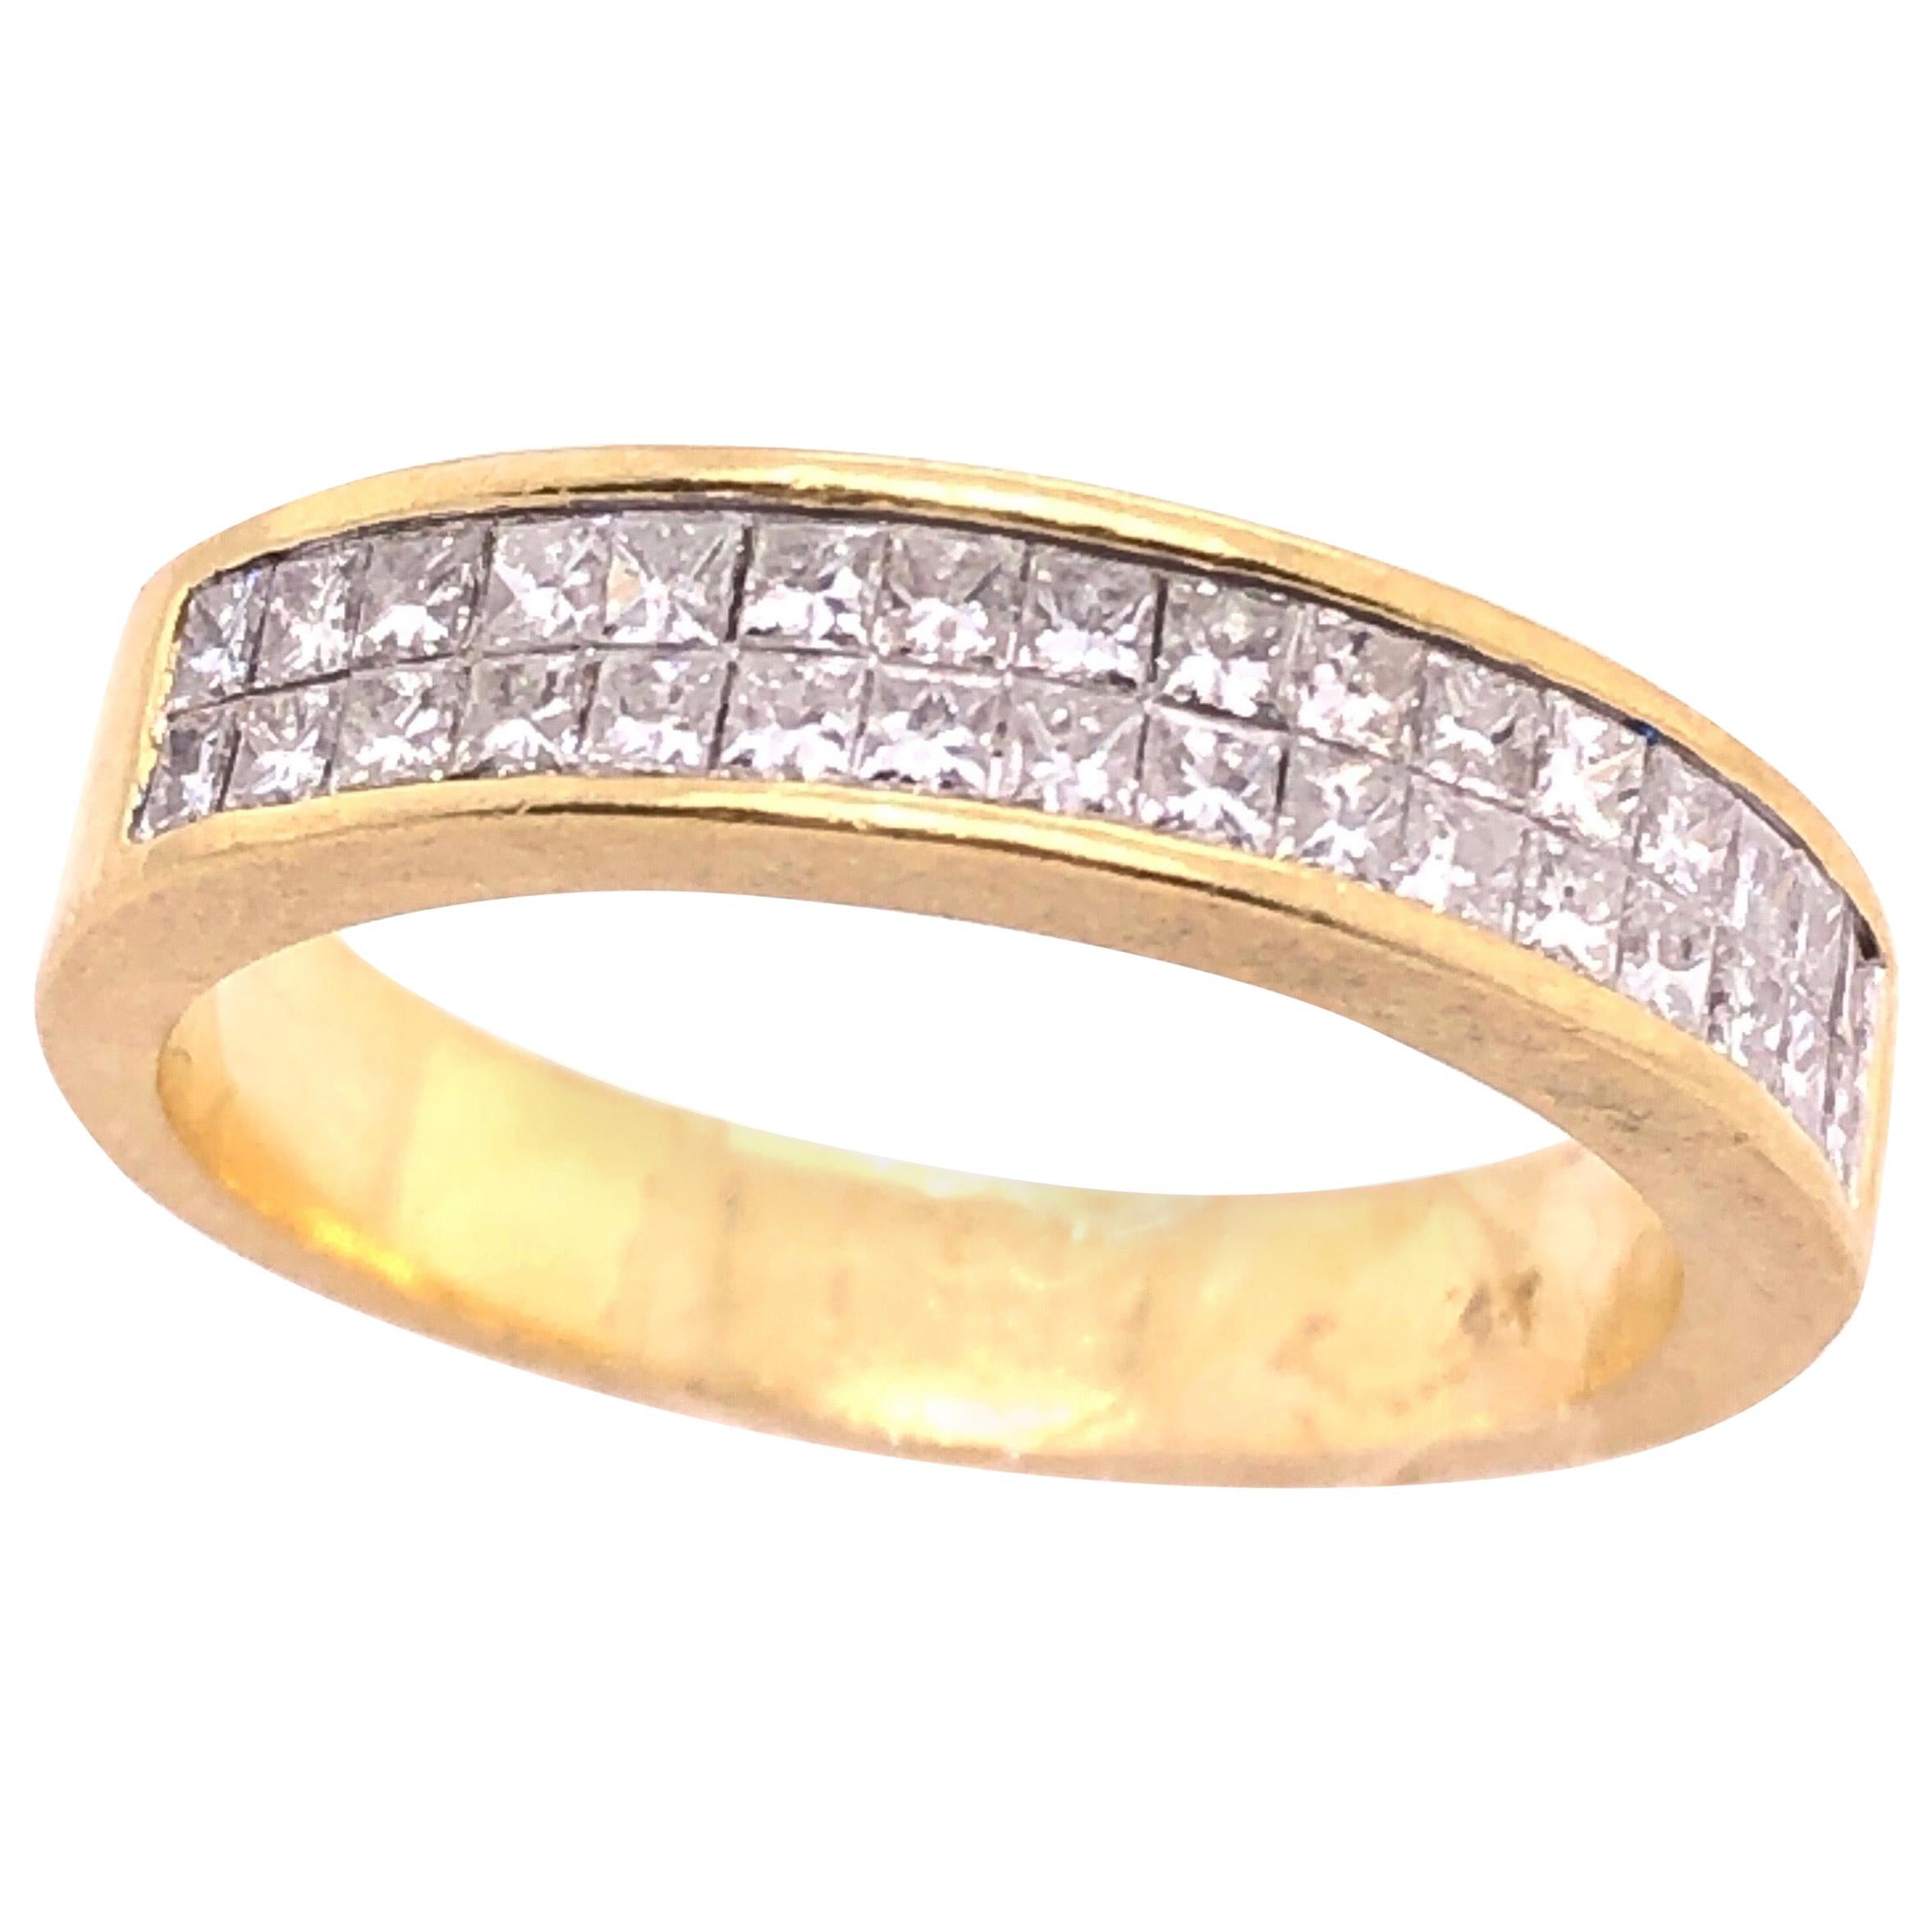 14 Karat Yellow Gold and Double Row Cushion Cut Diamond Wedding Band Ring For Sale